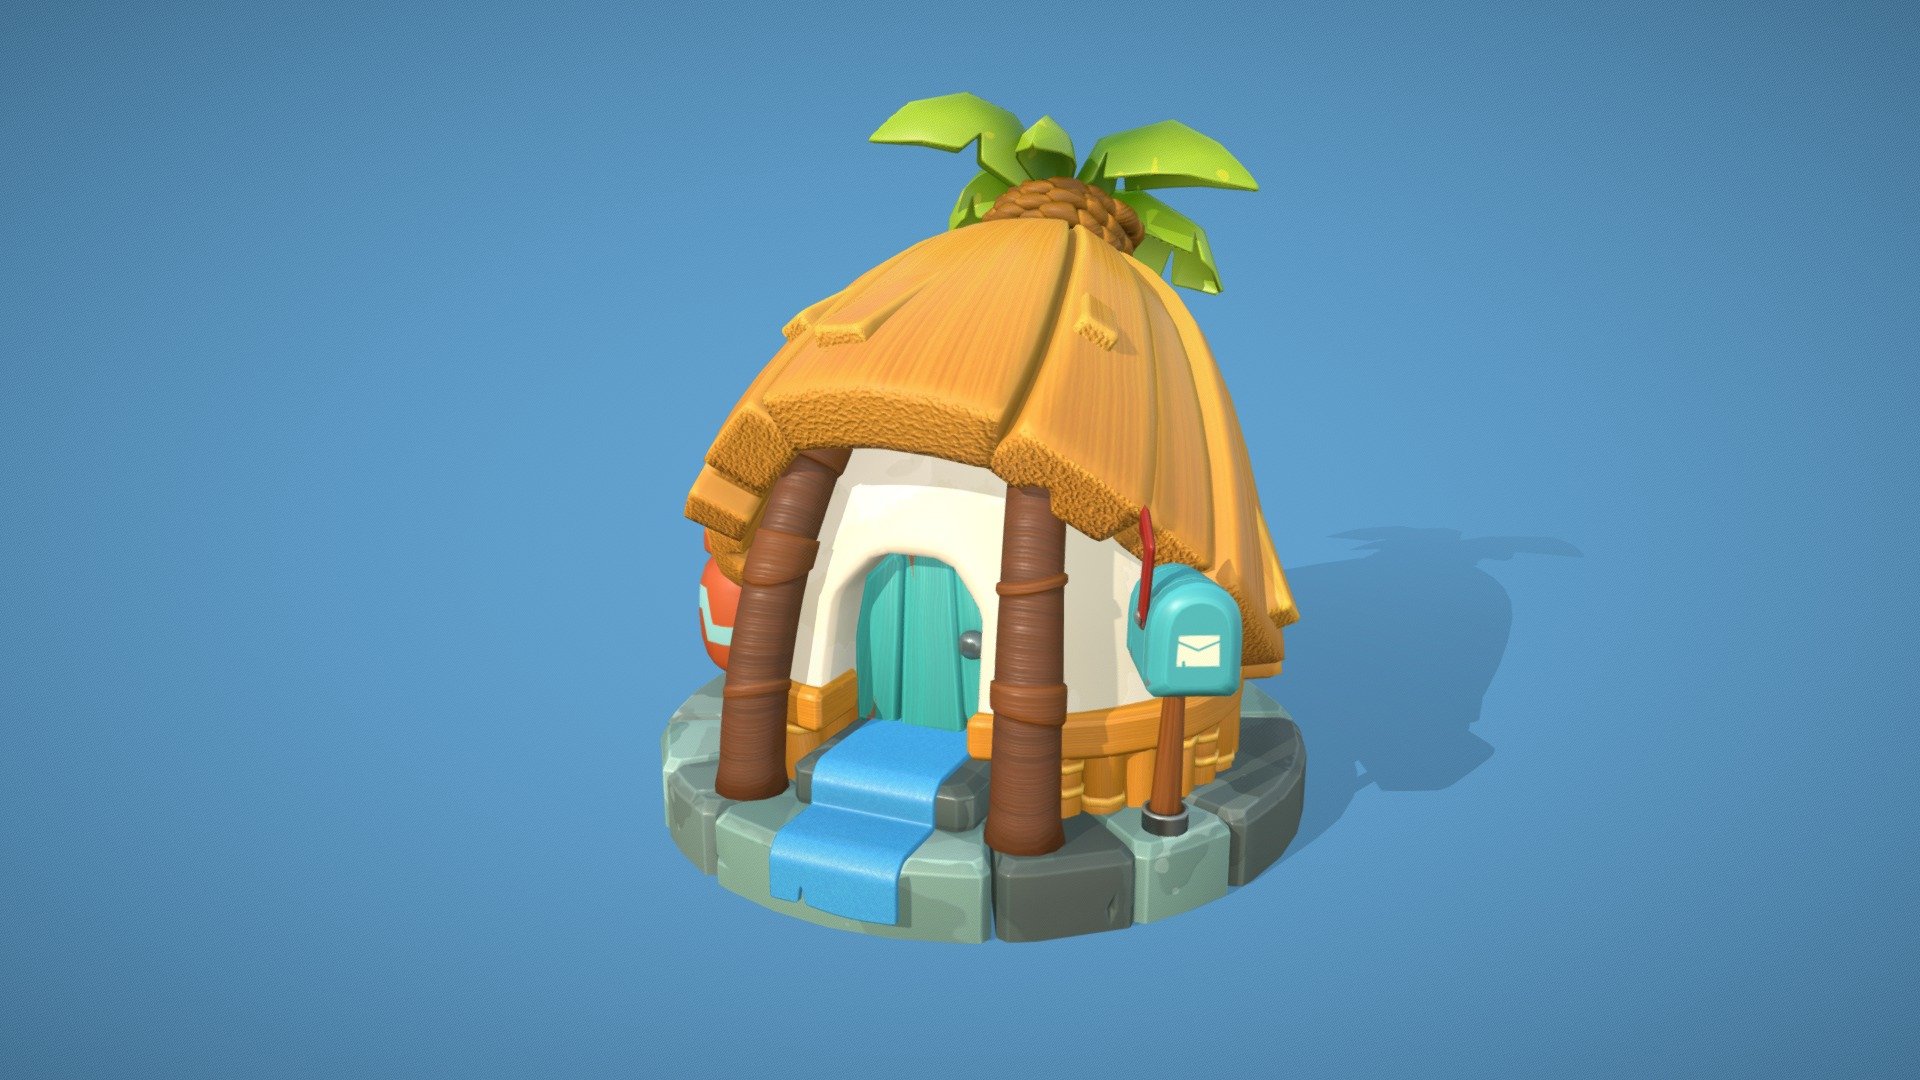 Fan art of a house I saw in a SuperCell game &ldquo;Boom Beach Frontlines